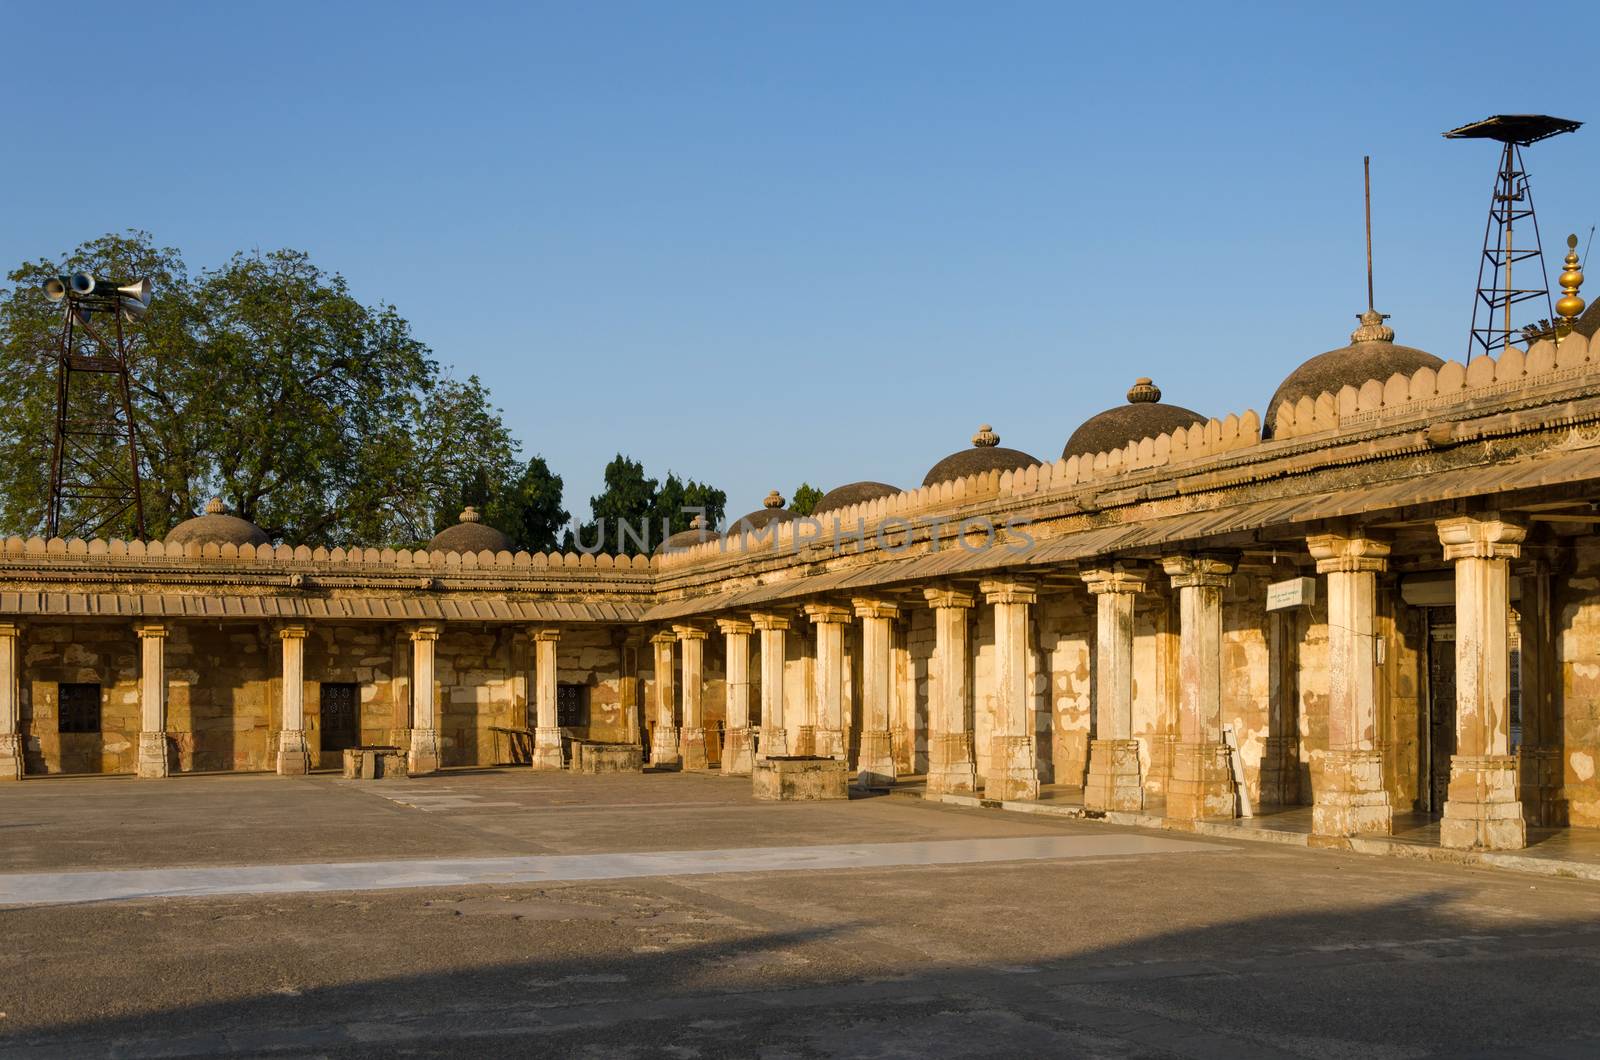 Colonnaded cloister of historic Tomb of Mehmud Begada, Sultan of Gujarat at Sarkhej Roza mosque